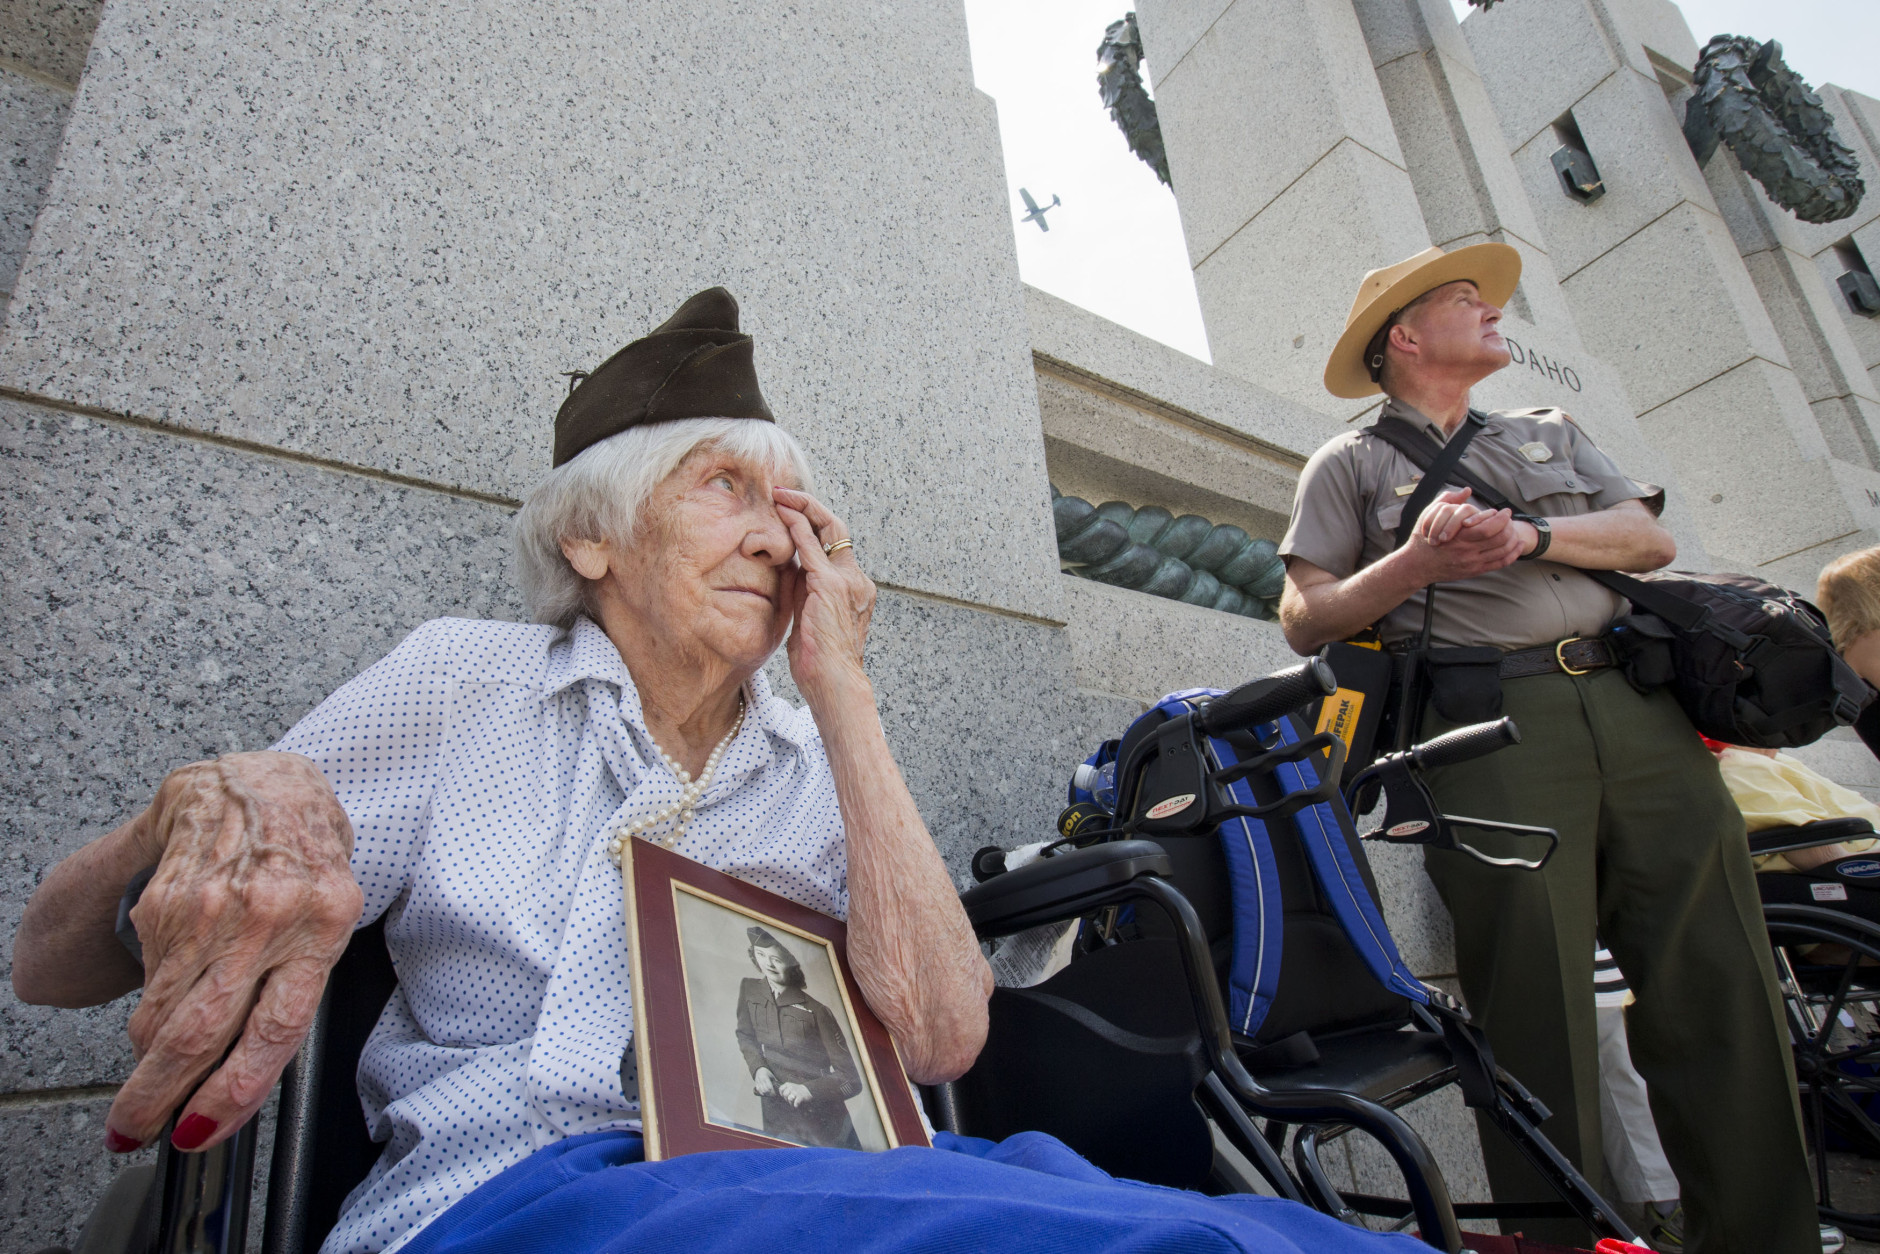 Holding a World War II-era photograph of herself, Elizabeth Copp, 96, of Falls Church, Va., who was a sergeant in the Women's Army Corps during the war, watches as vintage aircraft fly over the World War II Memorial in Washington, Friday, May 8, 2015, in remembrance of the 70th anniversary of Victory in Europe Day (VE Day). The flyover above the National Mall features historically sequenced formations of more than 50 vintage World War II-era aircraft. (AP Photo/Jacquelyn Martin)